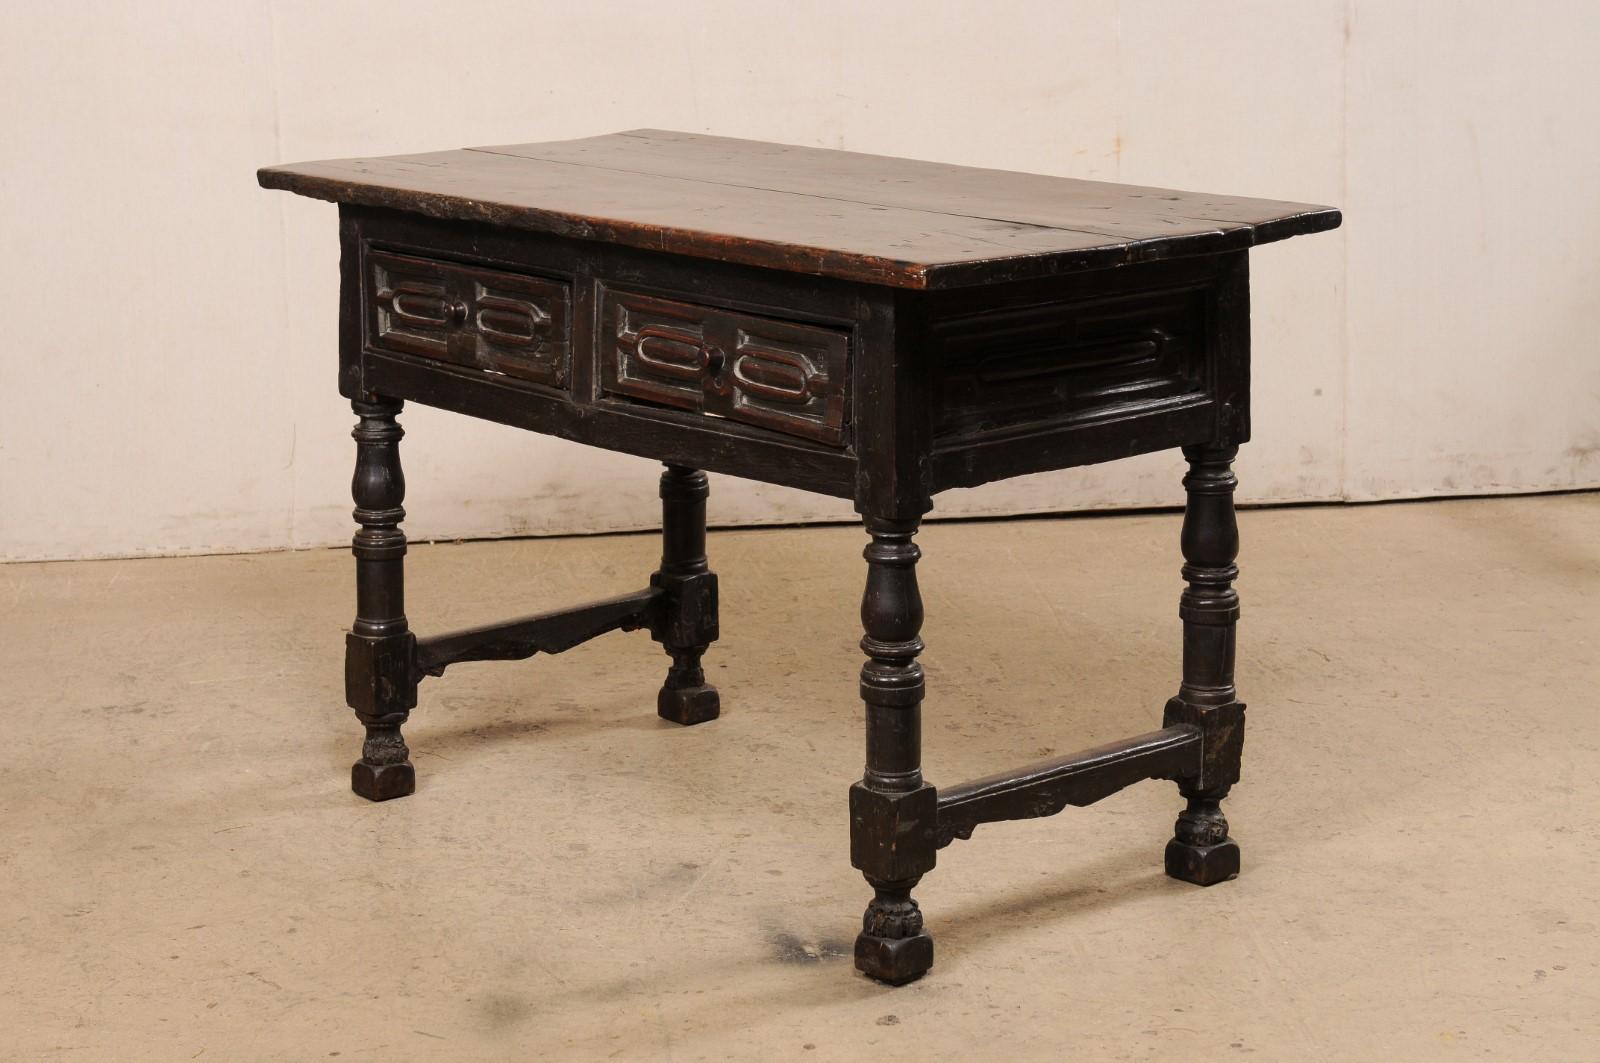 Italian Carved-Walnut Occasional Table W/Drawers, All Sides Carved, Early 18th C For Sale 7